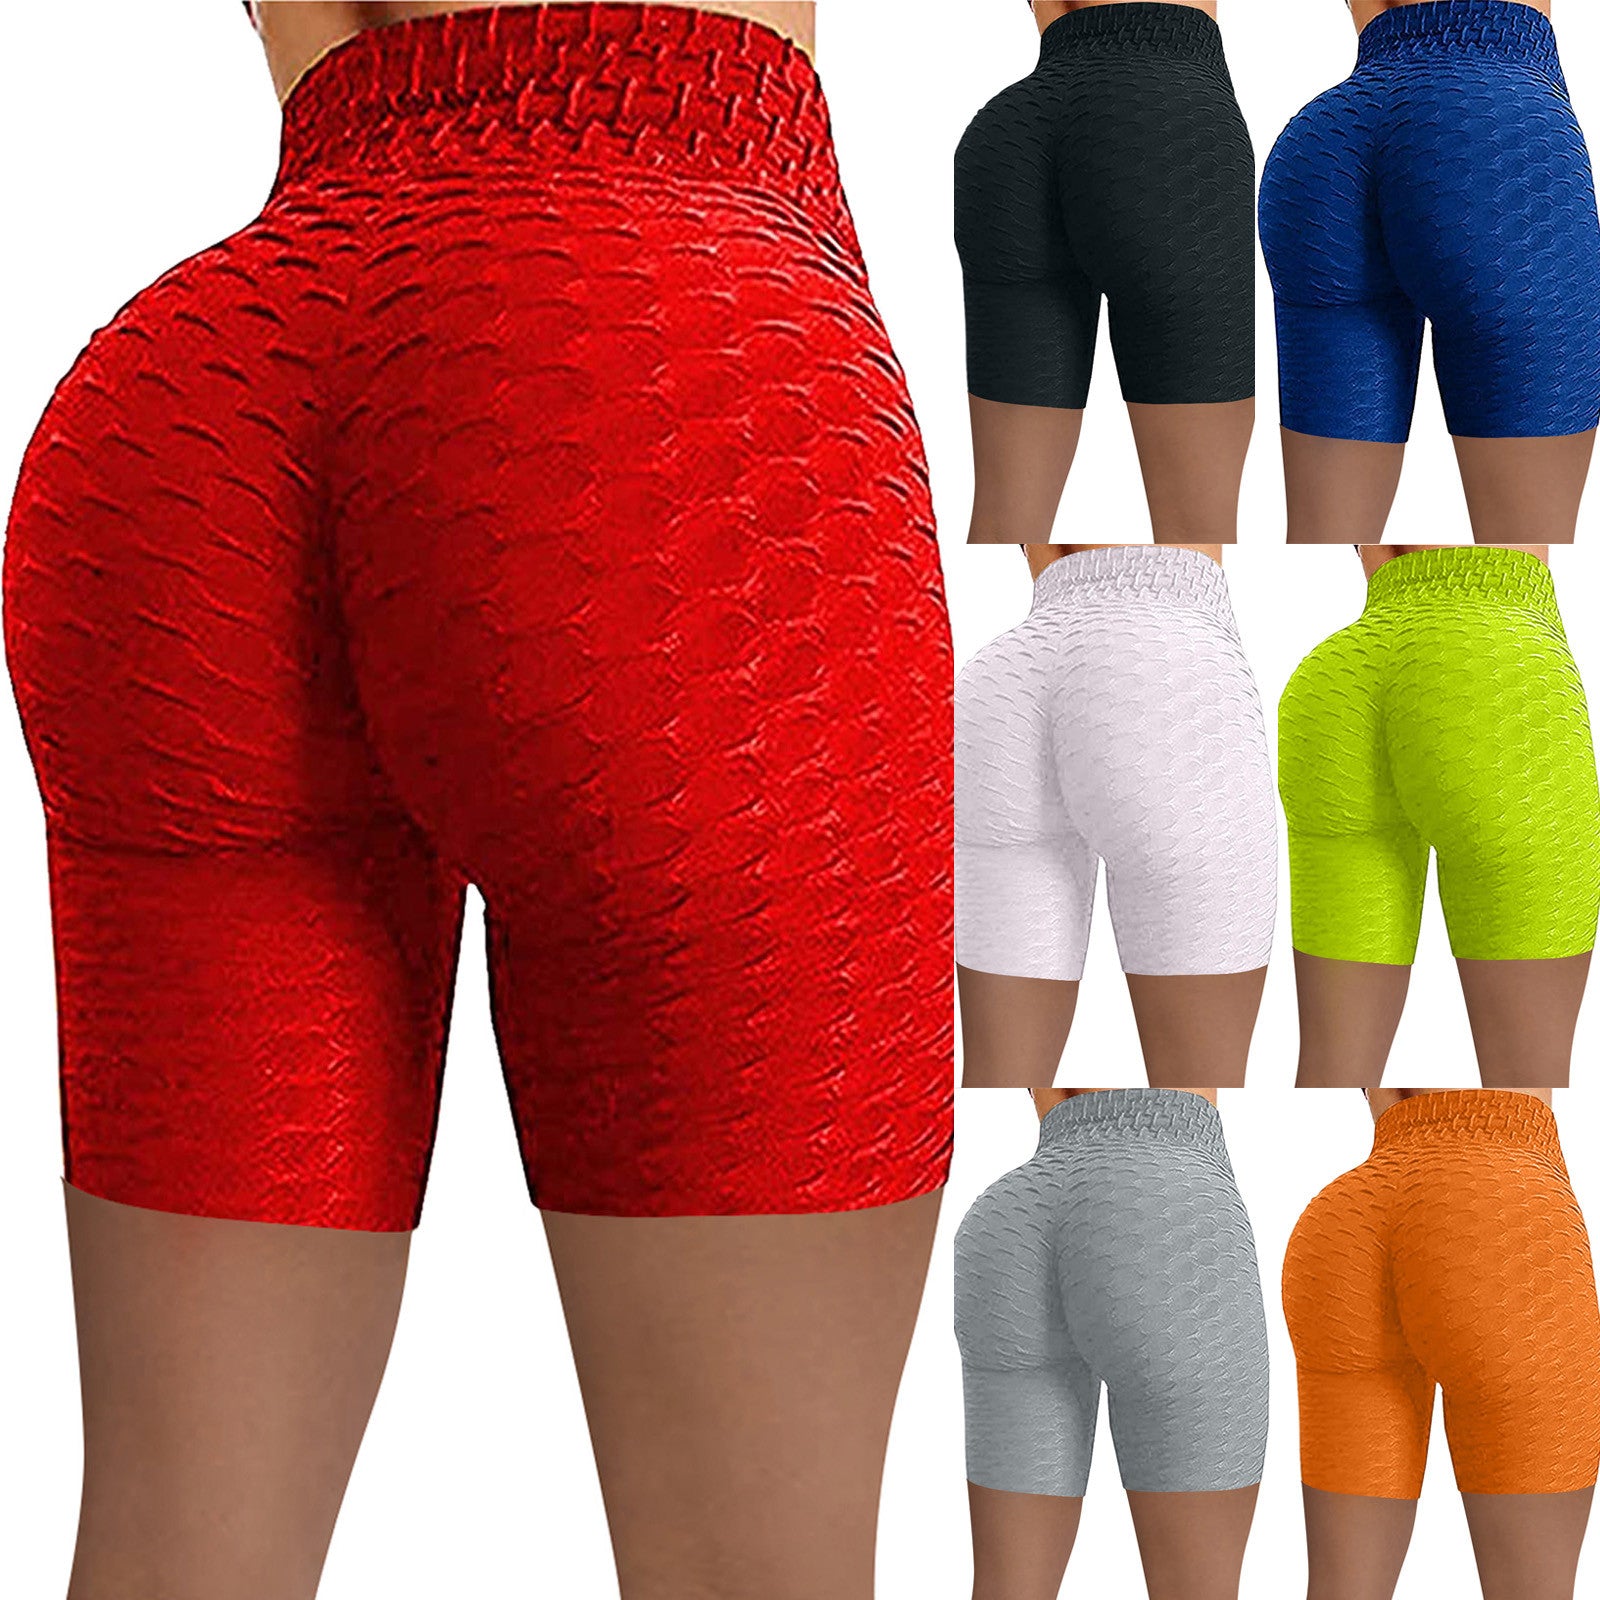 Honeycomb Legging Capri Shorts collection of colors Back View